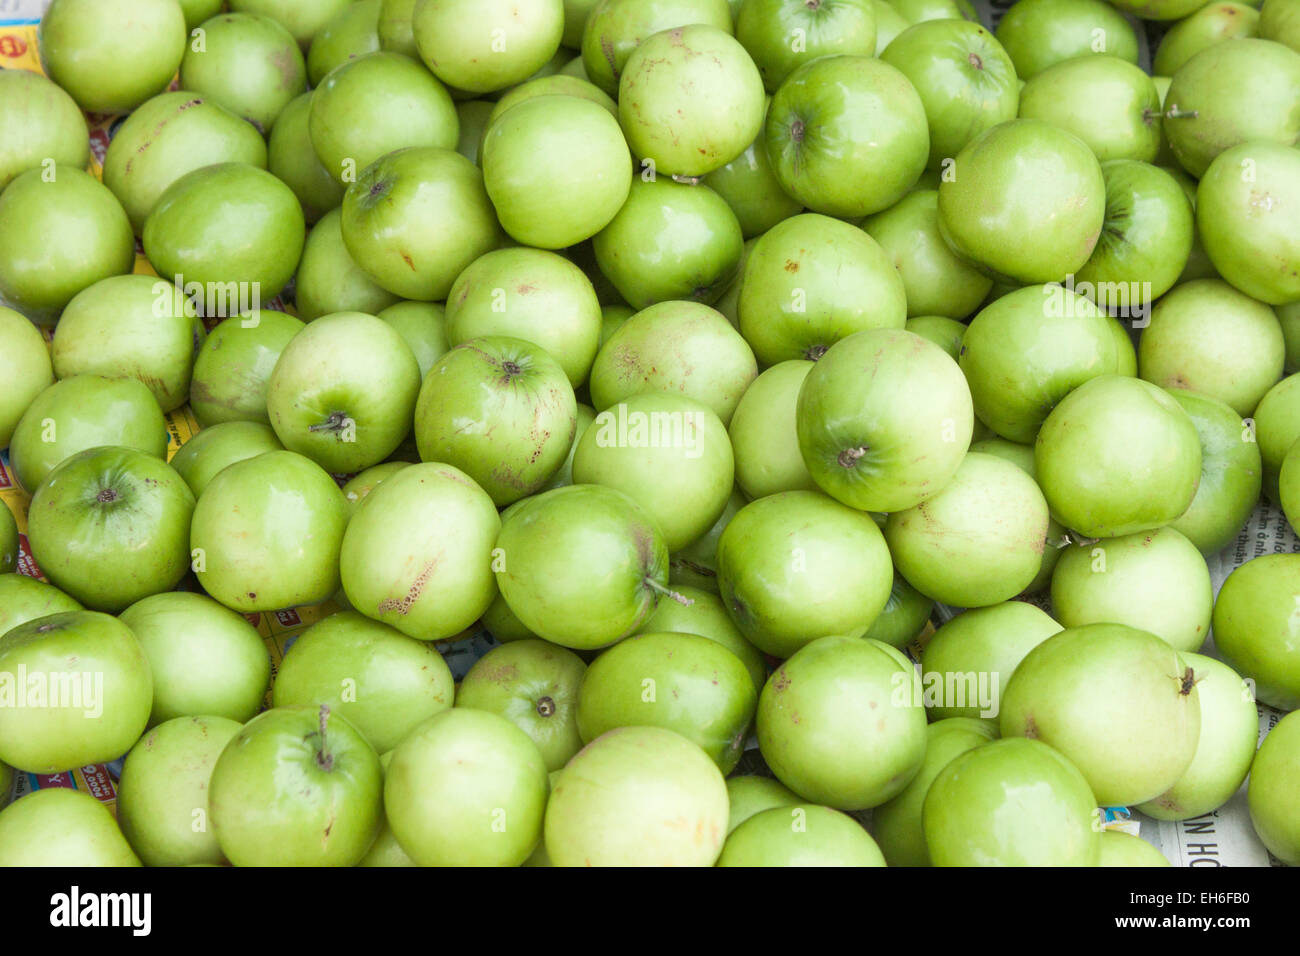 A lot of star apples, at a market in Phu Quoc, Vietnam Stock Photo